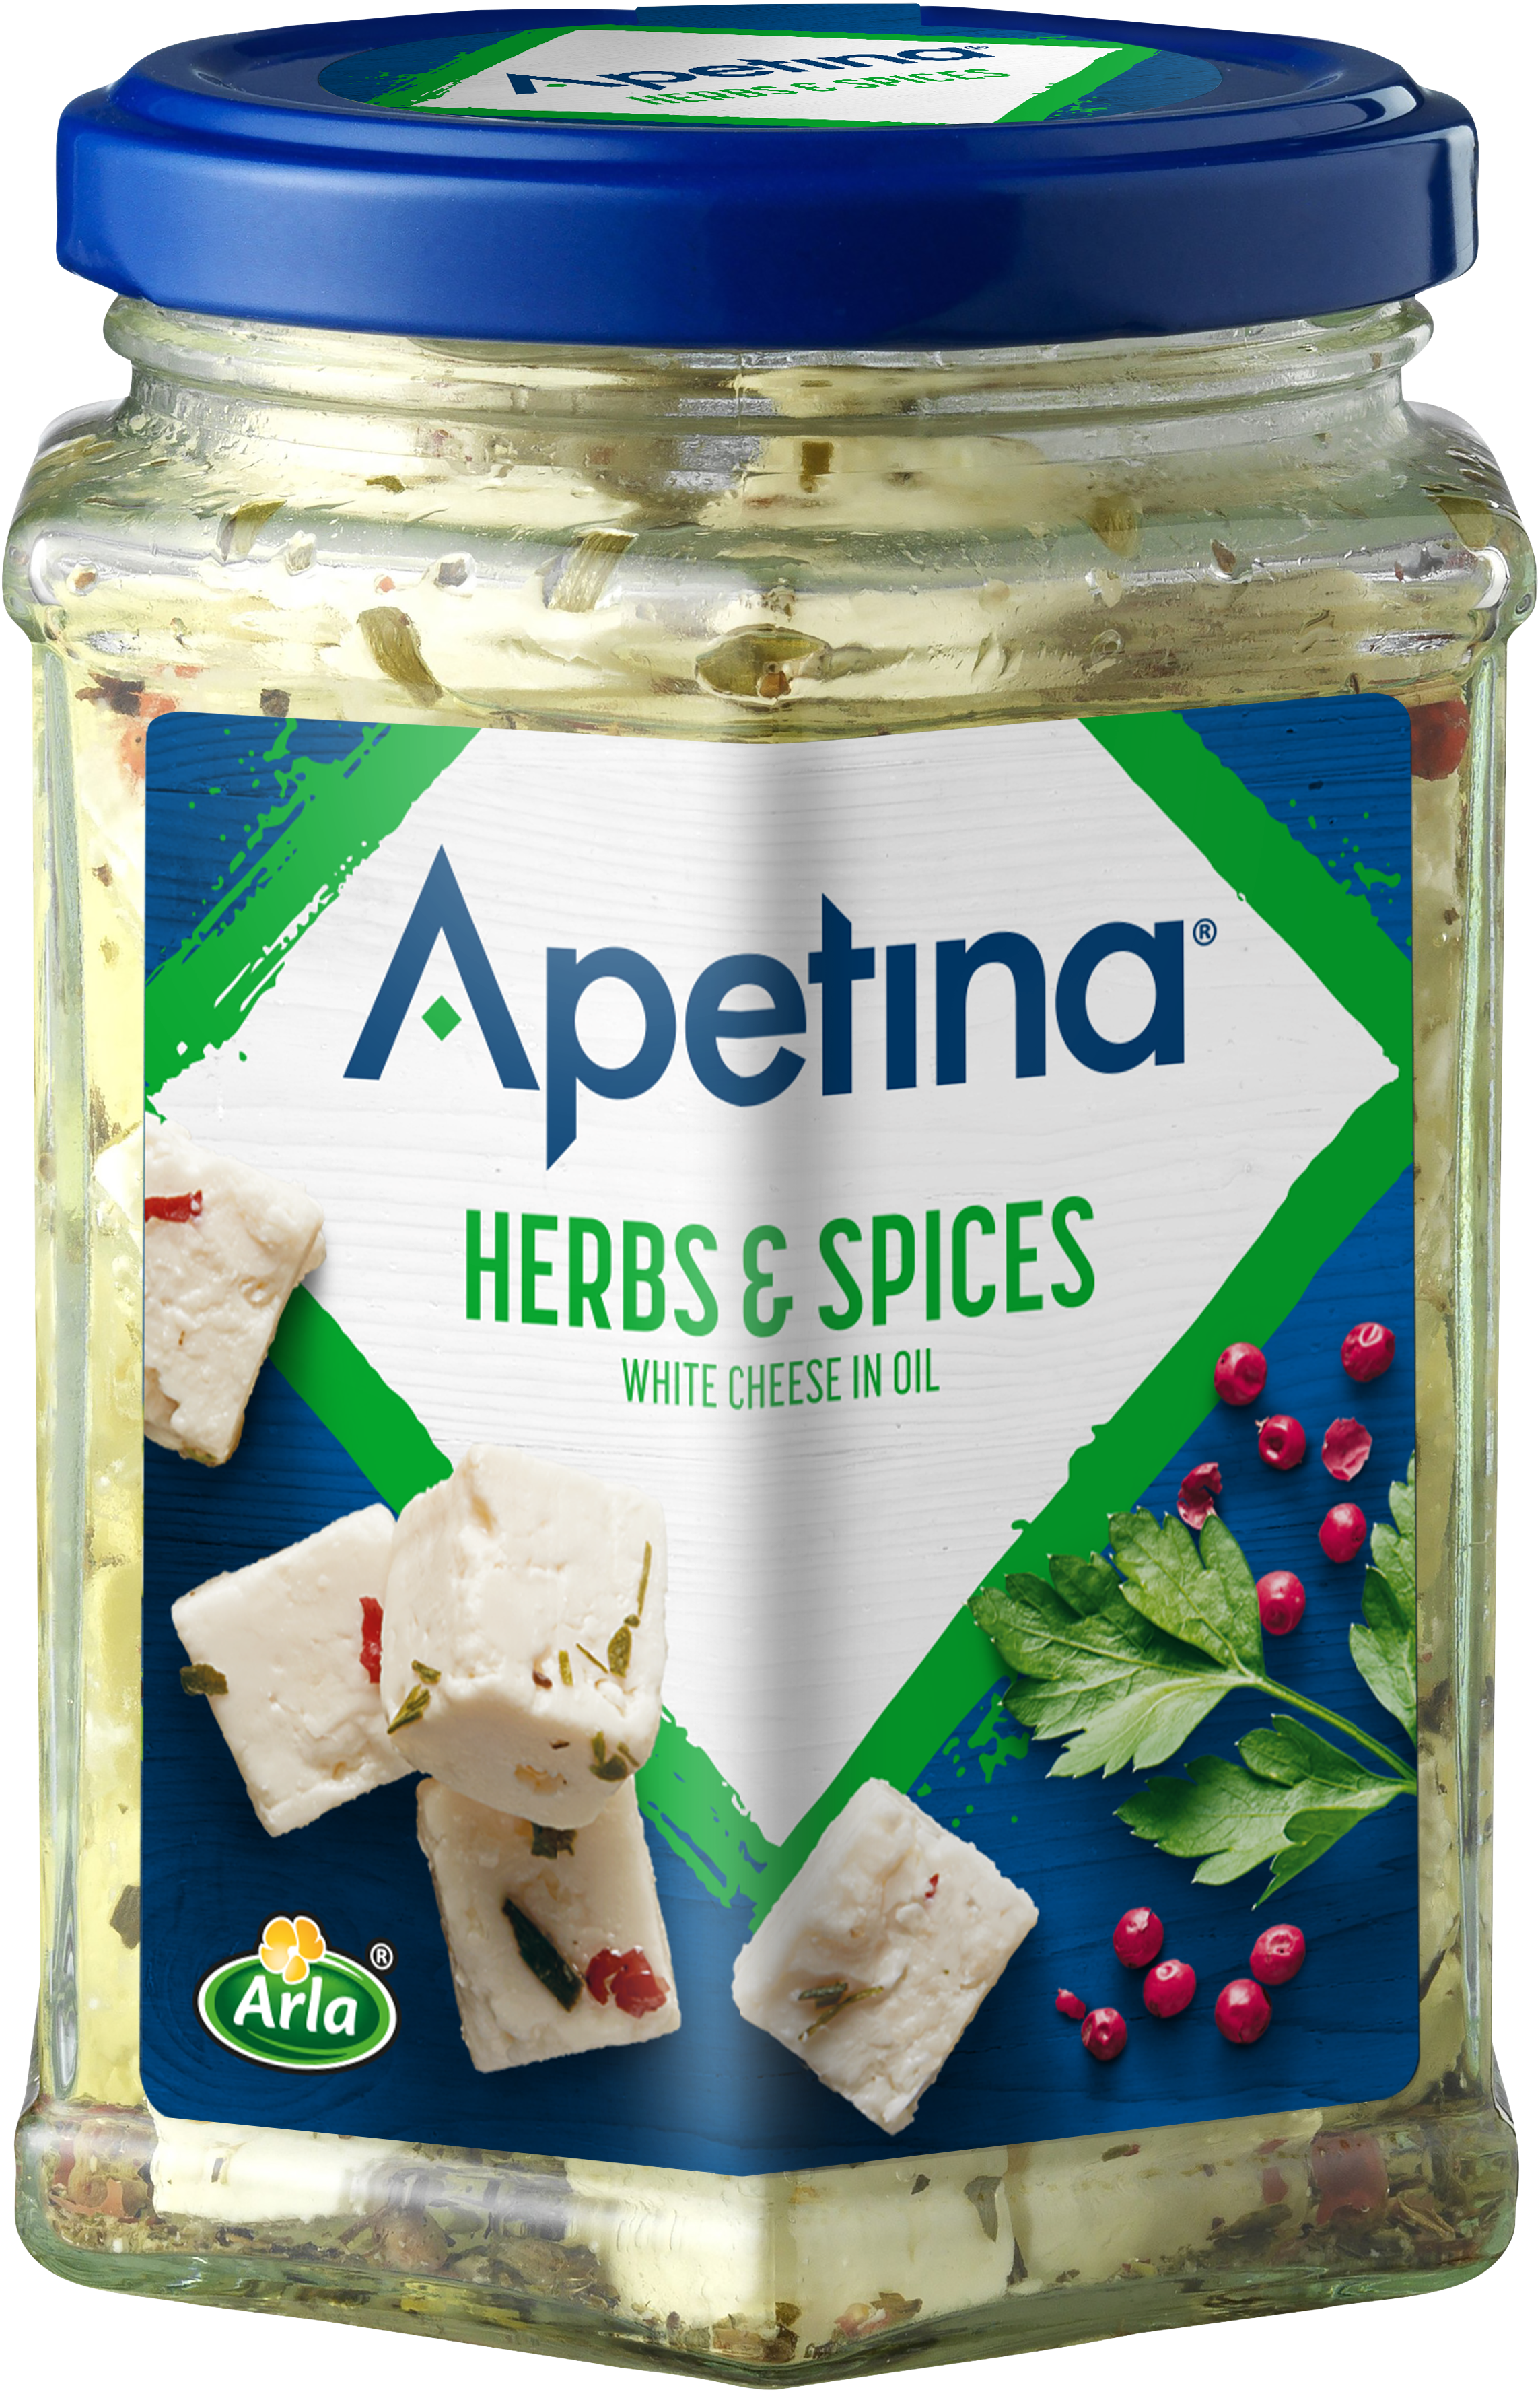 Apetina® Apetina white cheese cubes in oil herbs & spices 265g